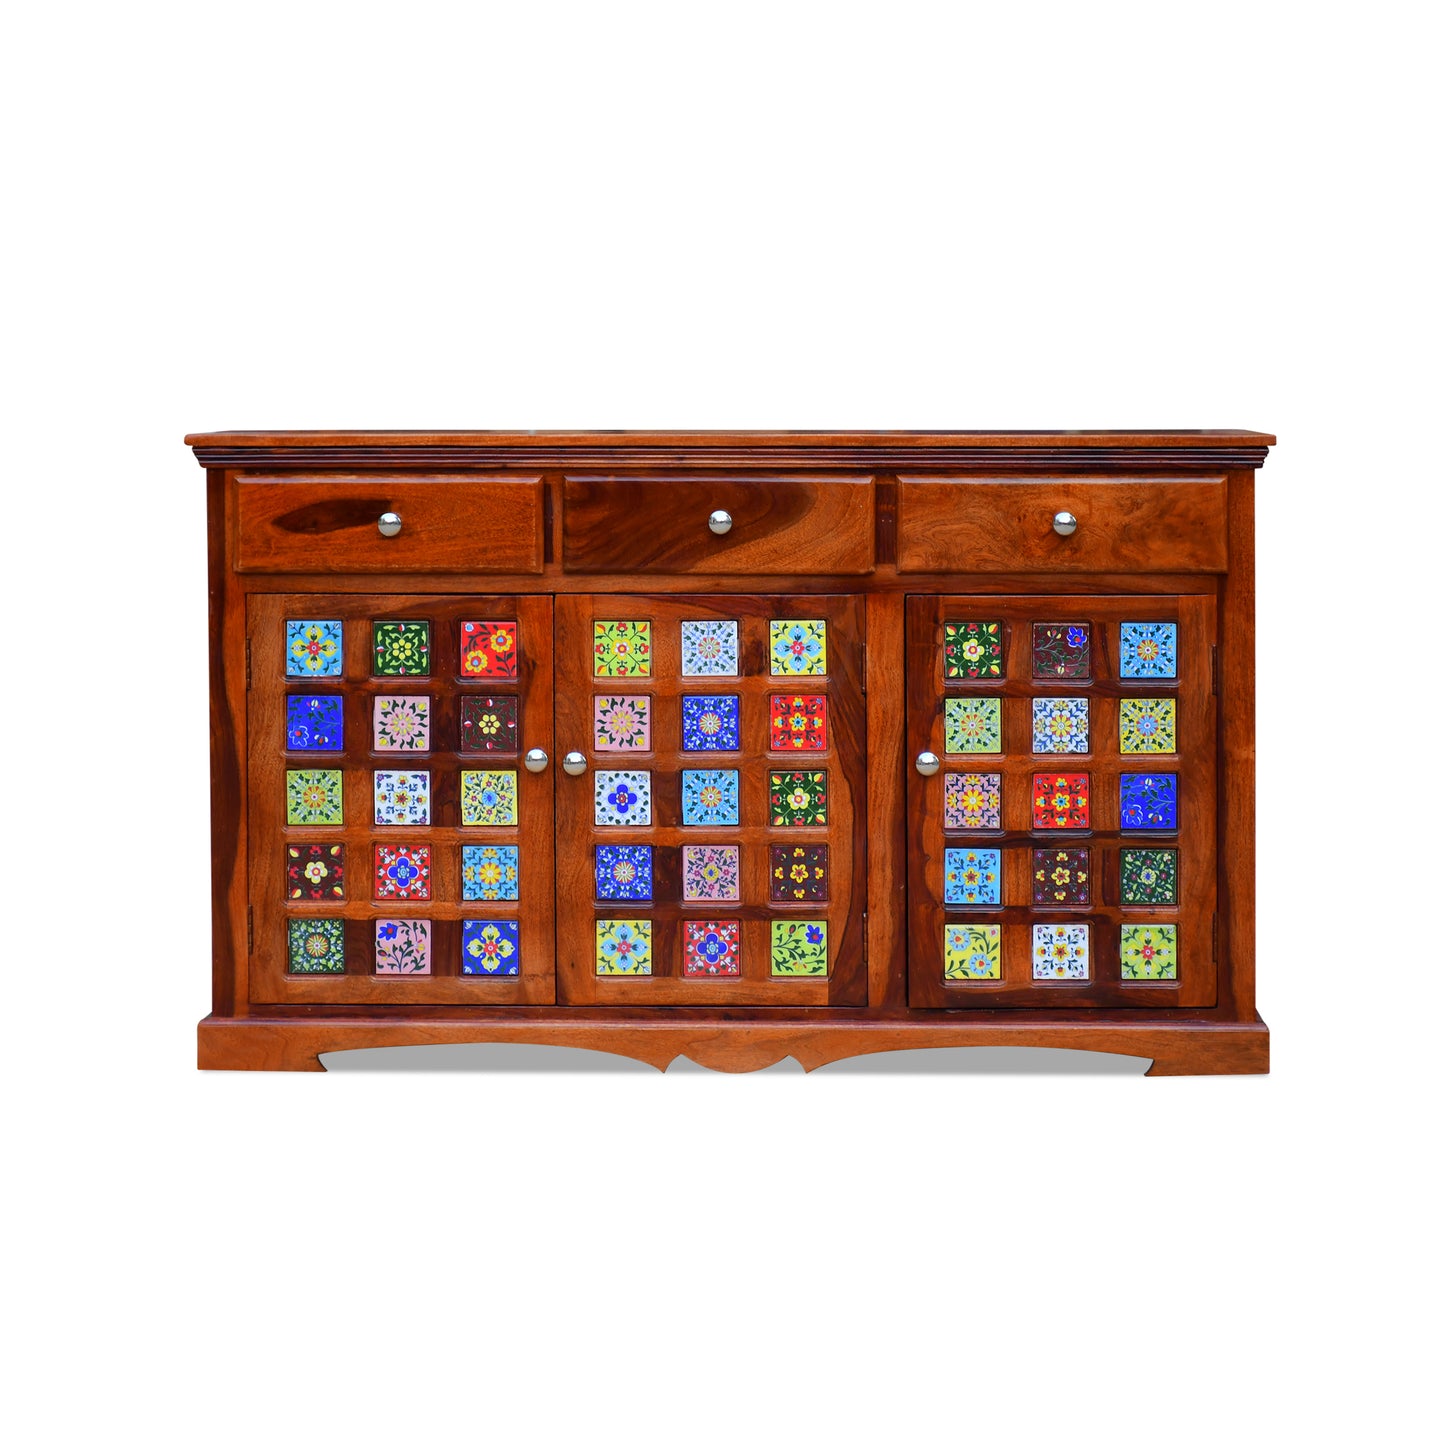 MoonWooden Sheesham Wood Sideboard Tv Cabinet for Living Room | Kitchen Storage Free Standing Movable Tv Unit Side Board Table With 3 Drawers, Door Cabinet & Shelf Storage Furniture for Home | Solid Wood, (Honey Finish)